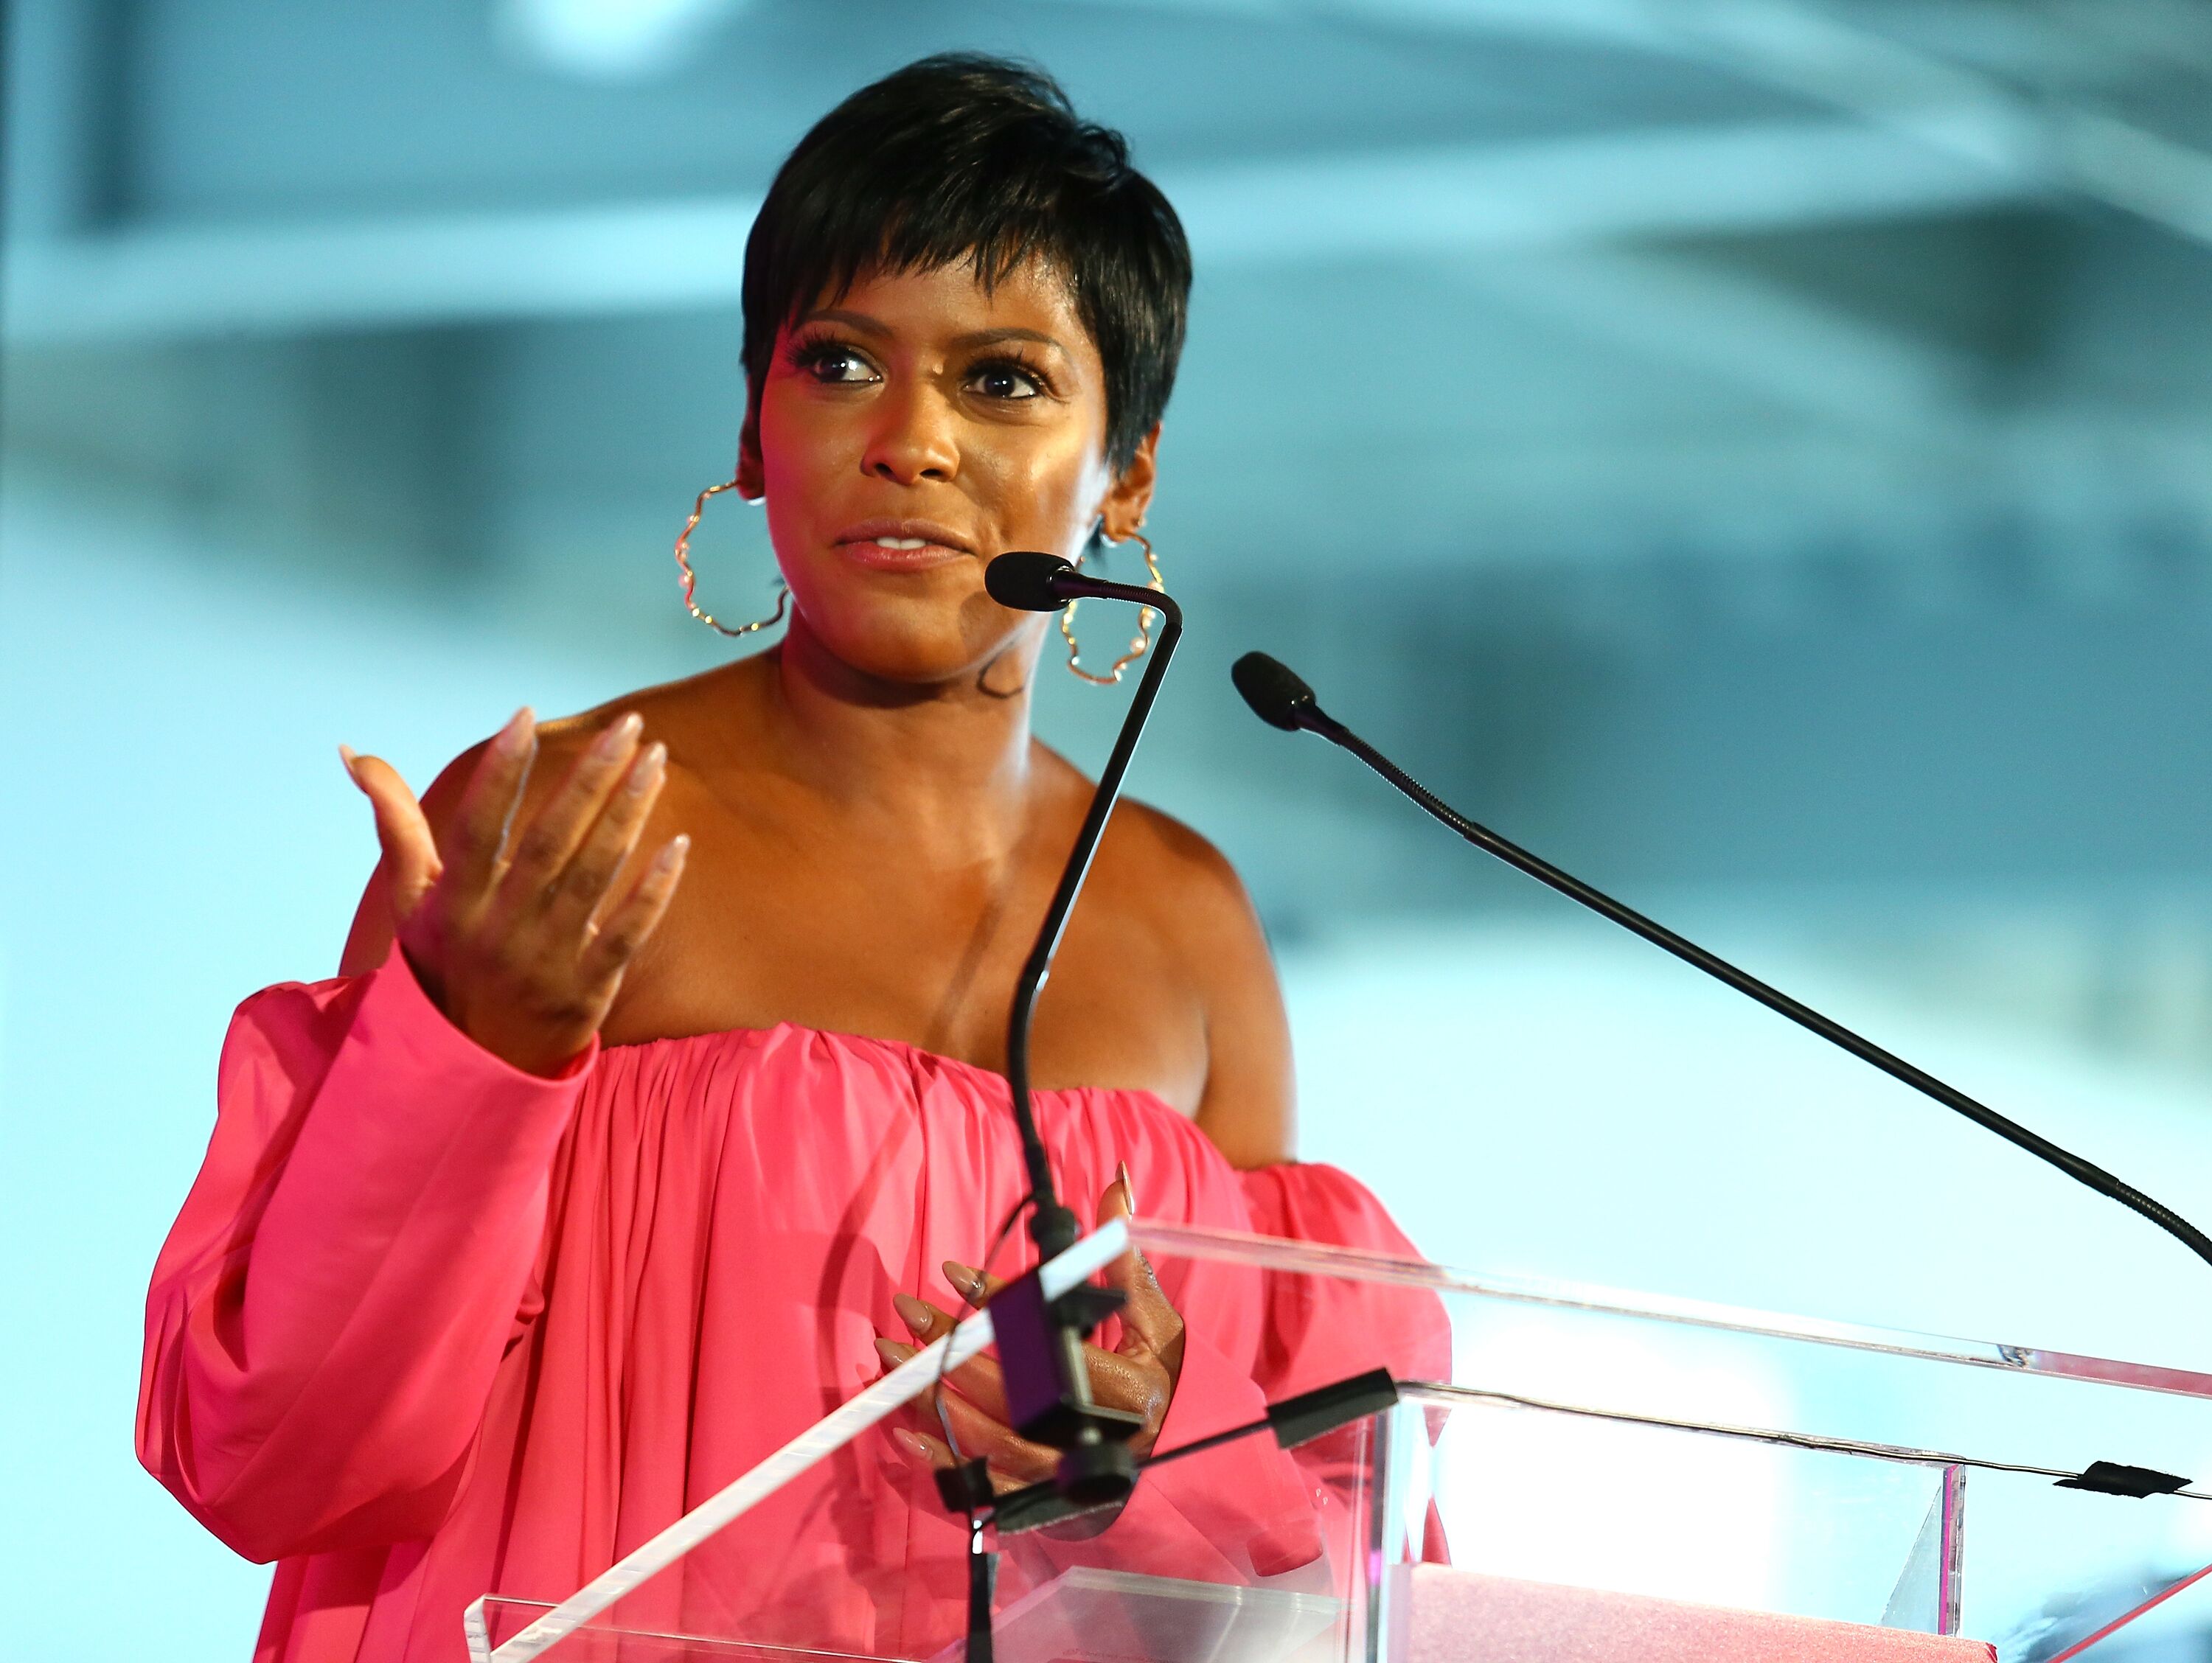 Tamron Hall at one of her speaking engagements | Source: Getty Images/GlobalImagesUkraine